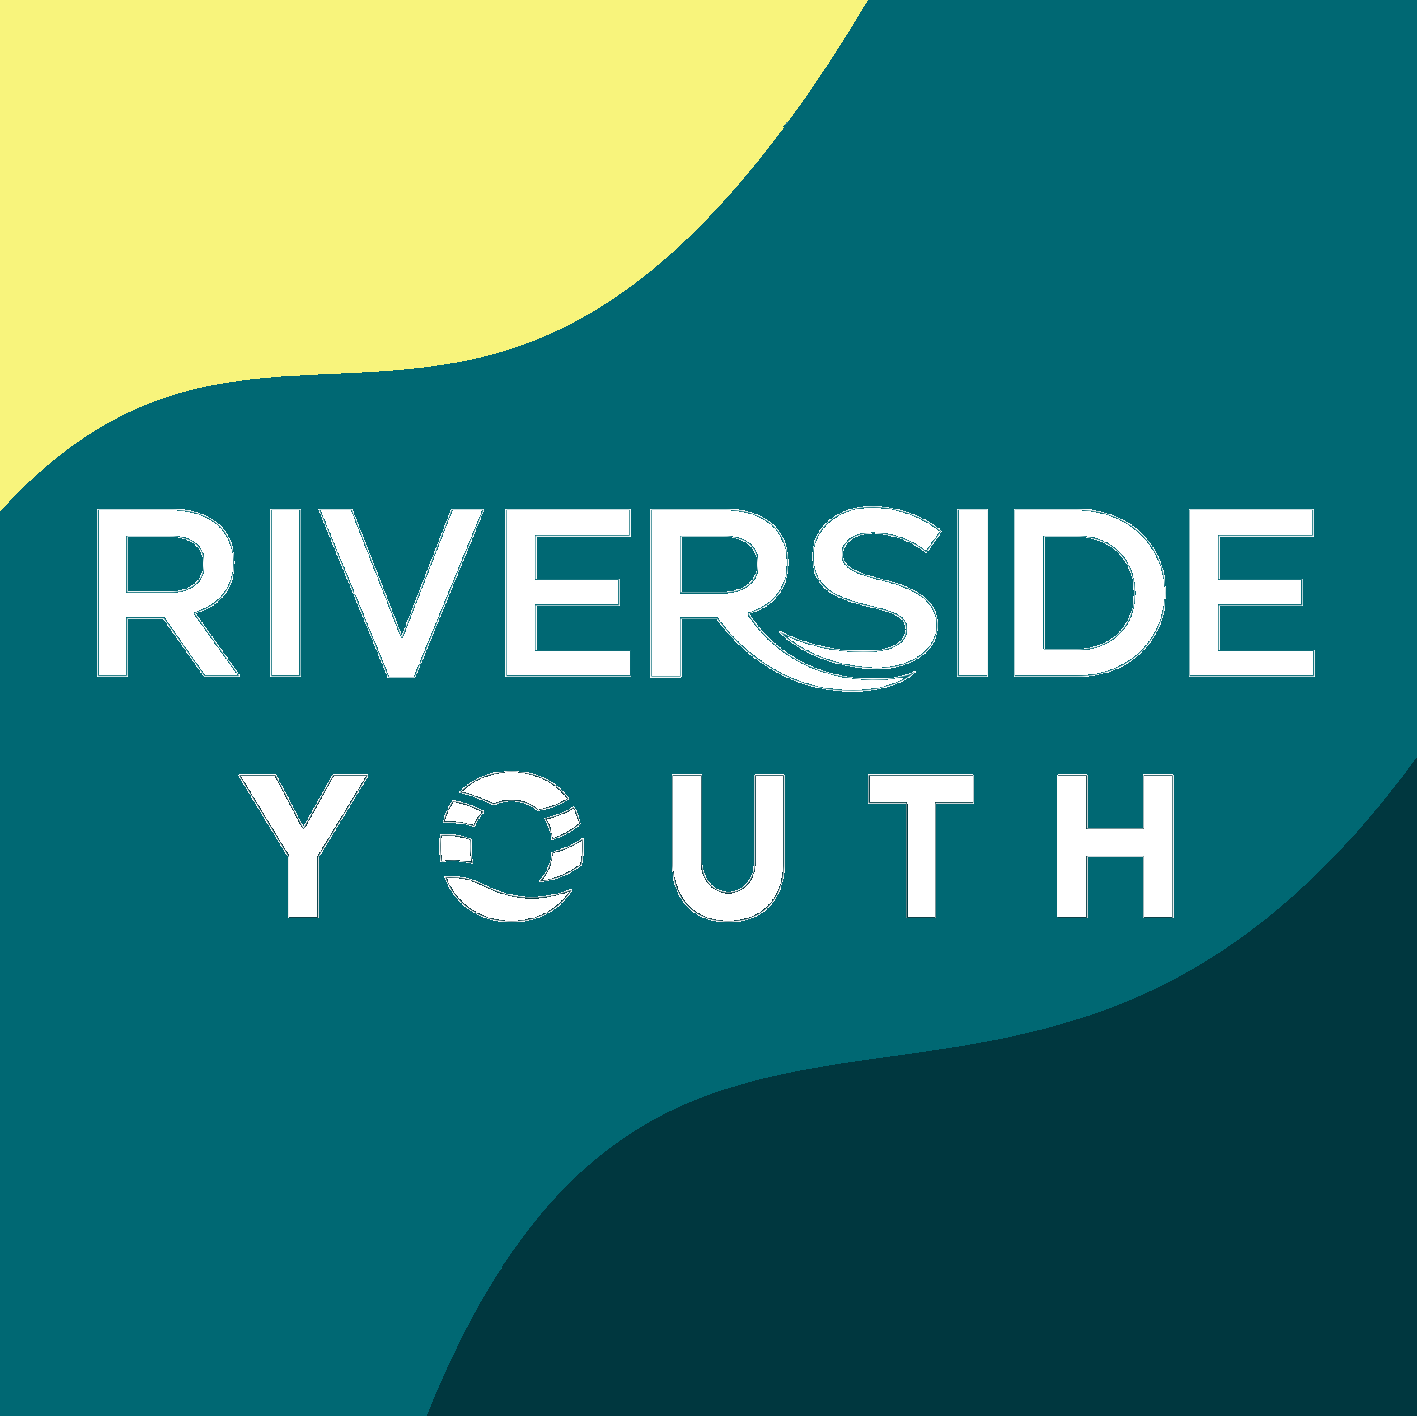 Square ruversdue youth 3